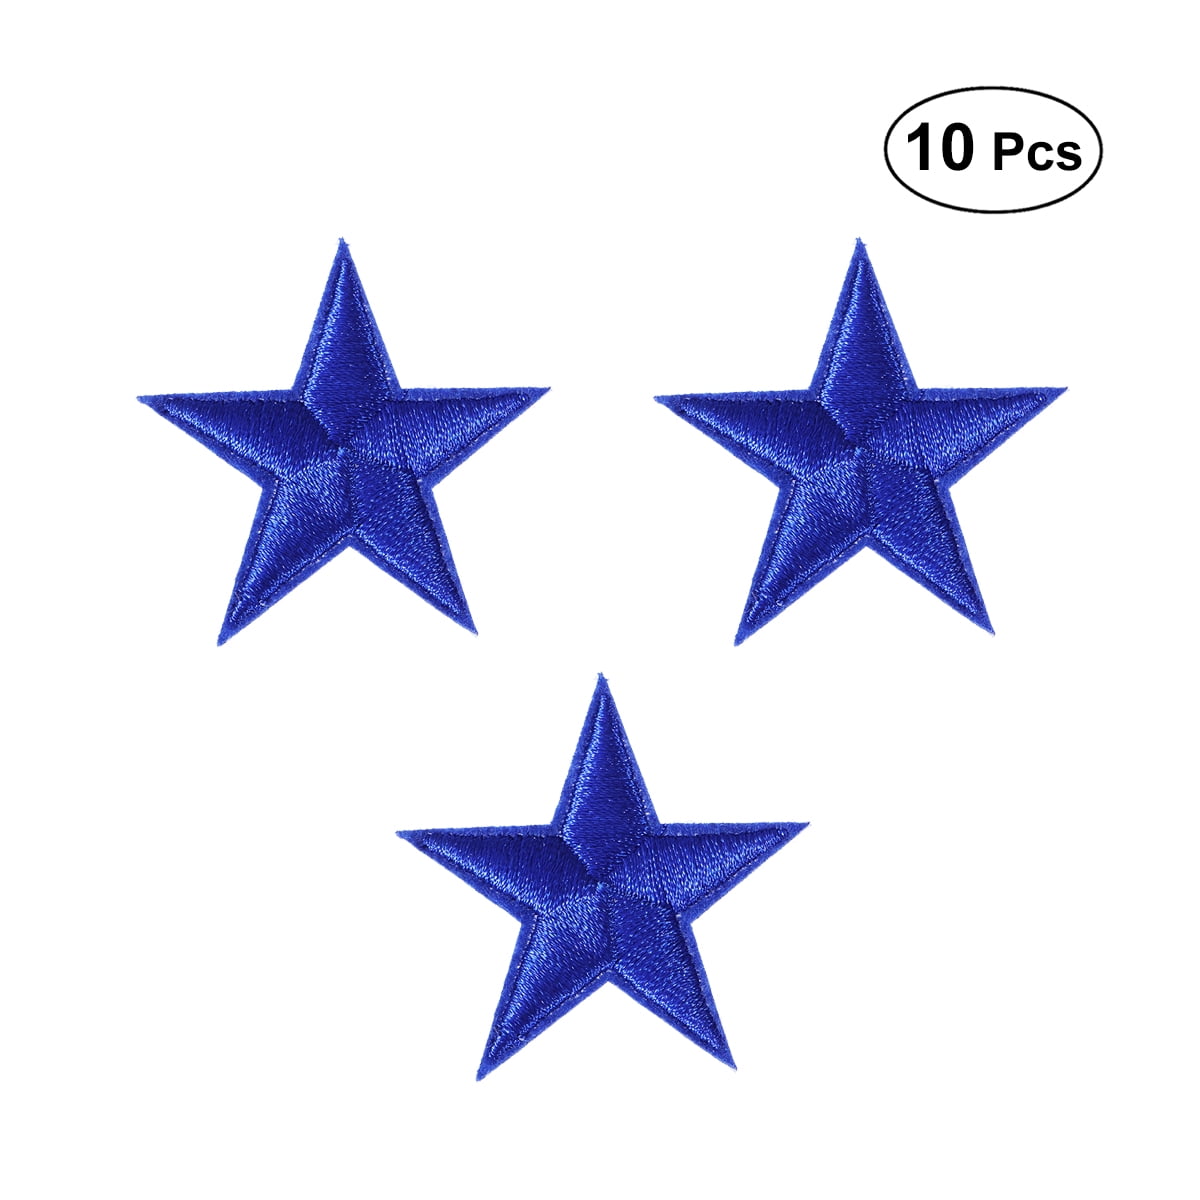 DIY Embroidered Iron On Patch Stickers For Clothing And Fabric Stickers  Badges Glittery Blue, White Eye, And More From Sadfk, $21.25